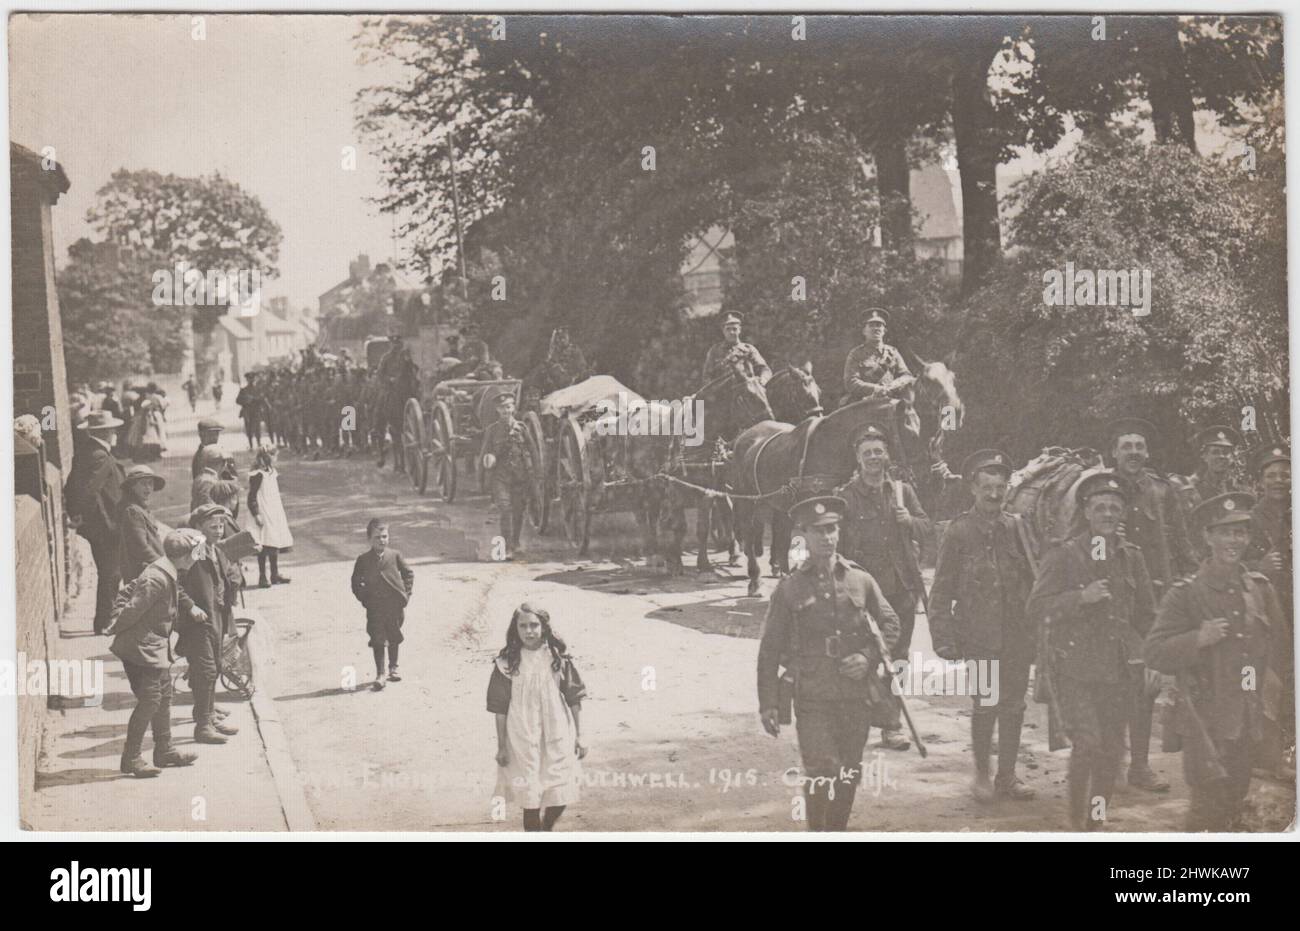 Royal Engineers at Southwell, Nottinghamshire, 1915: photograph of a column of soldiers marching through the town street in full uniform with rifles, several horse drawn carts with drivers are also included. Local men, women & children can be seen watching the event & a girl & boy appearing to be marching with the soldiers Stock Photo